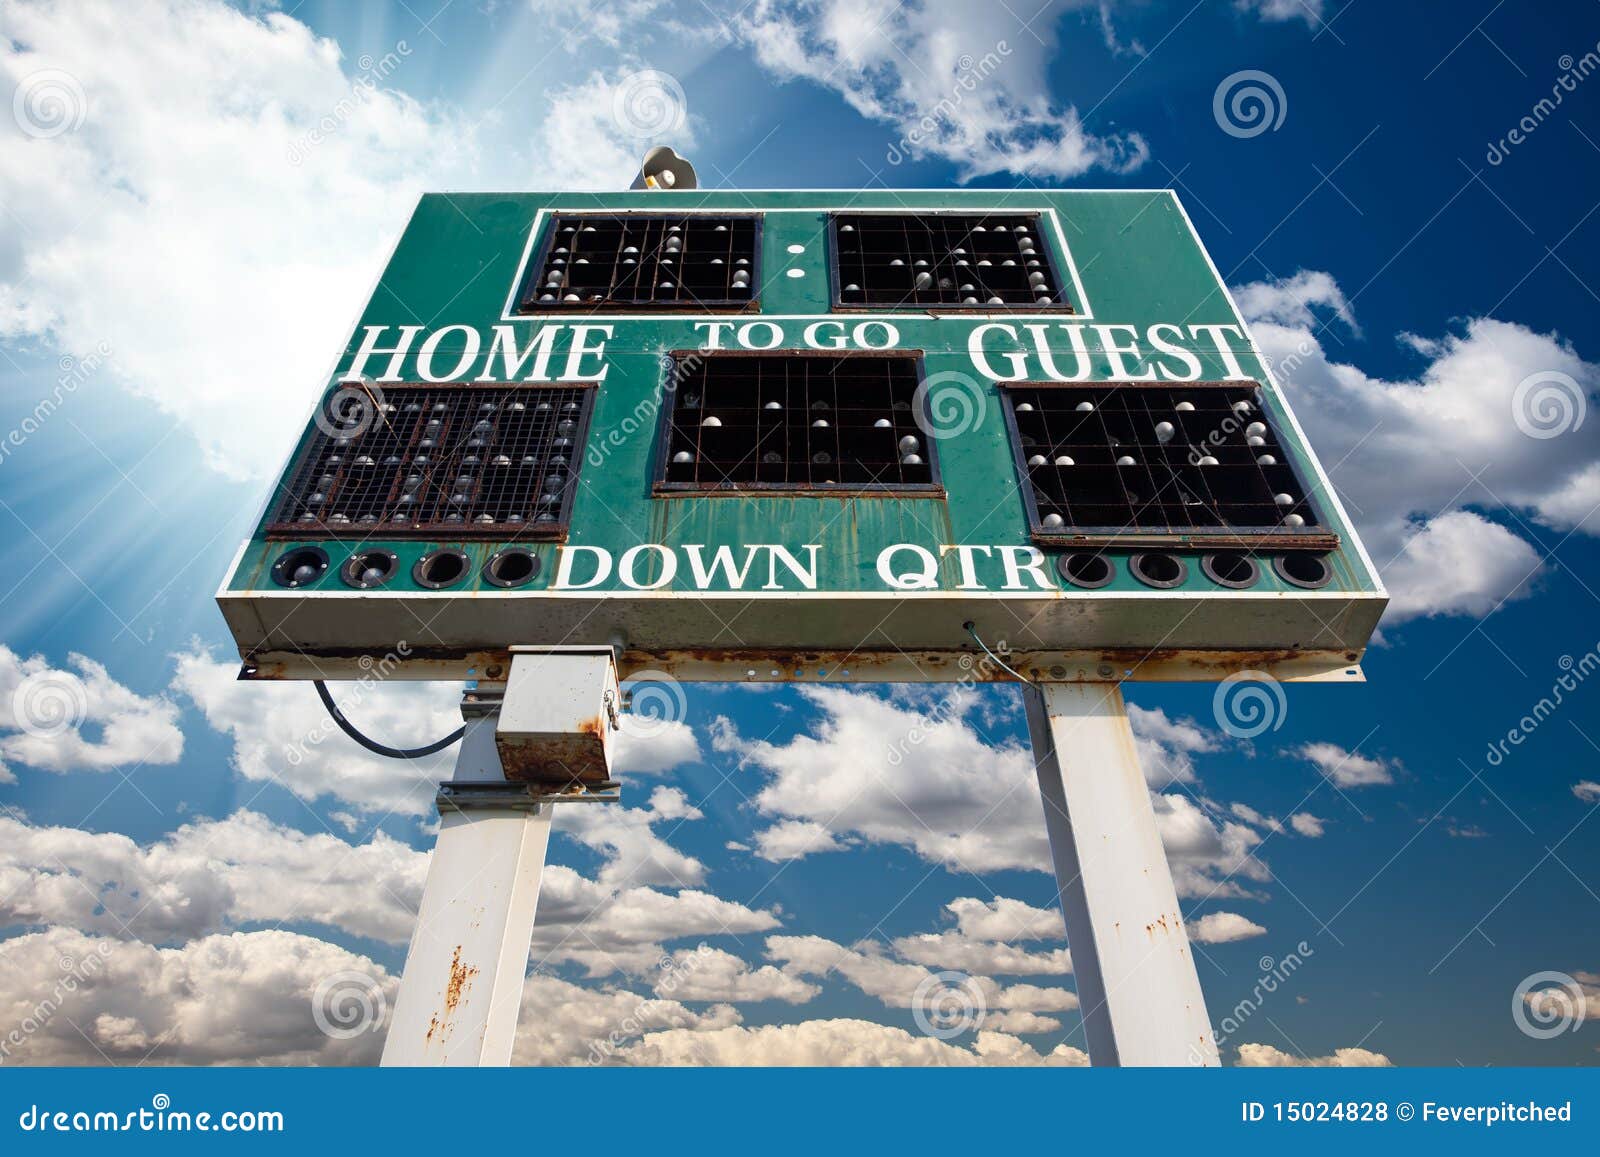 high school scoreboard over blue sky with clouds